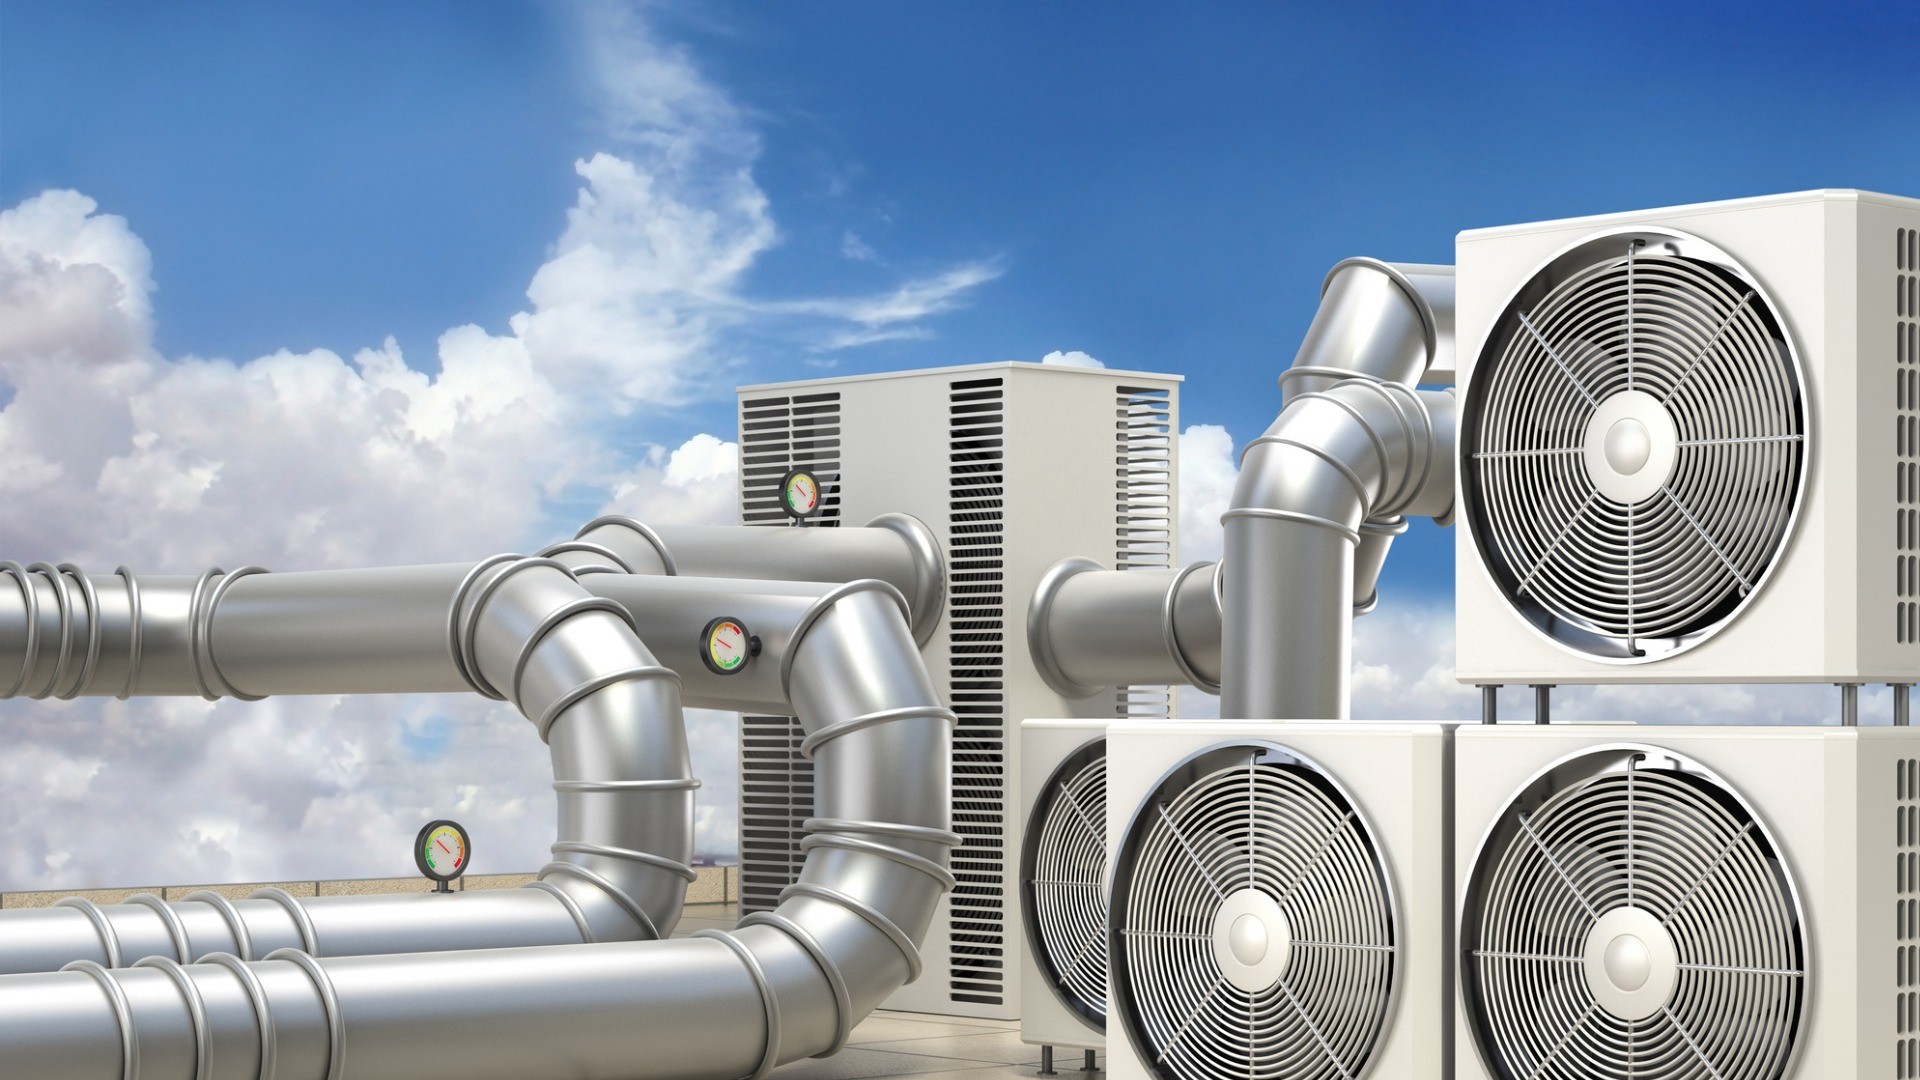 AIR-CONDITIONING SYSTEM DESIGN:-CURRENT AND COMMON ENGINEERING PROBLEMS & THEIR SOLUTIONS IN INDUSTRY